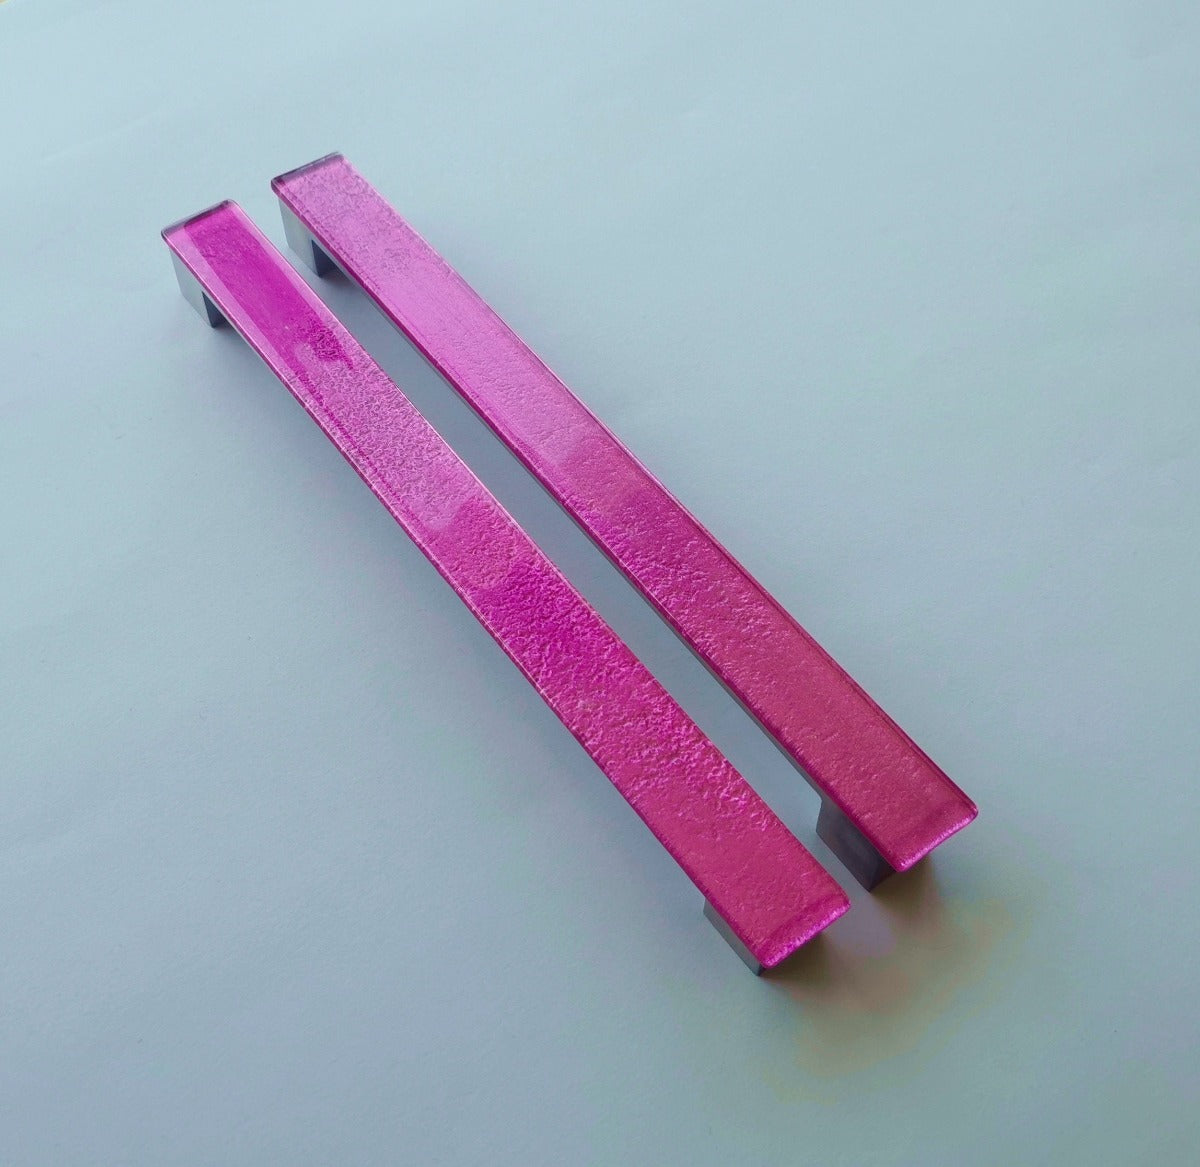 A Set of 2 Large Glass Pulls in Bright Pink. Artistic Fuchsia Glass Pull. Pink Glass Pull - 0022